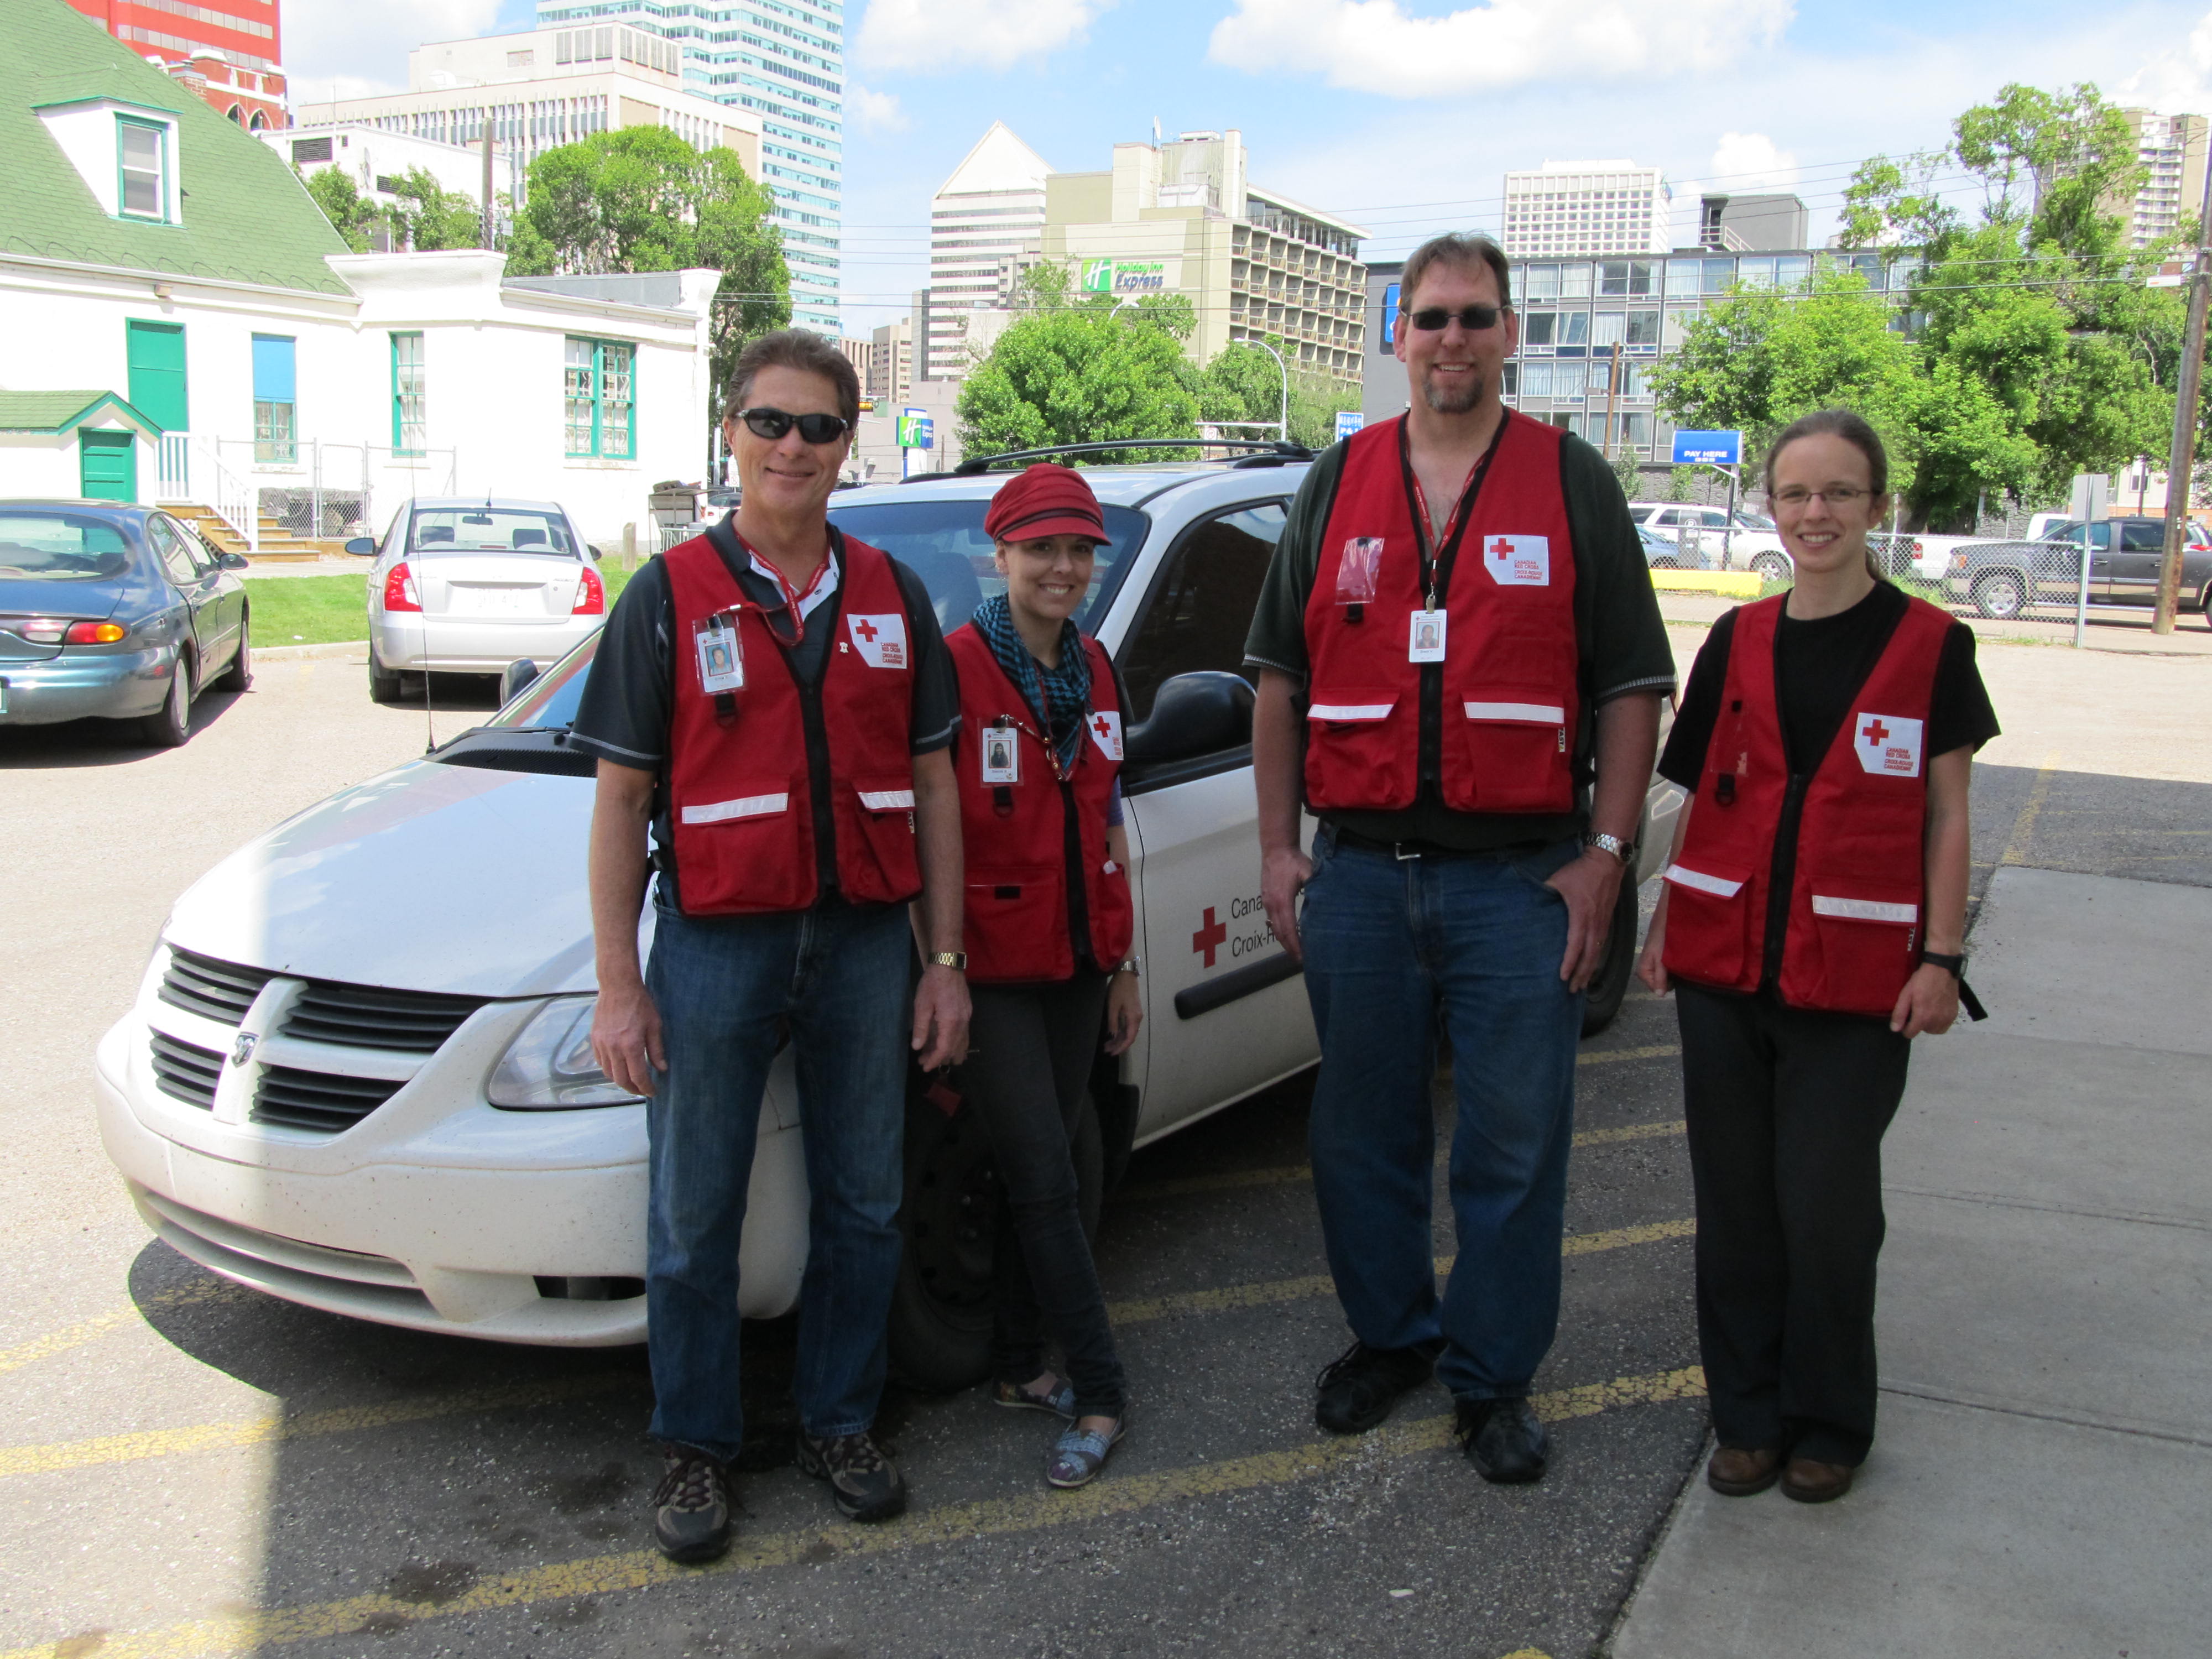 These Red Cross volunteers from Edmonton quickly responded to the call to deploy.